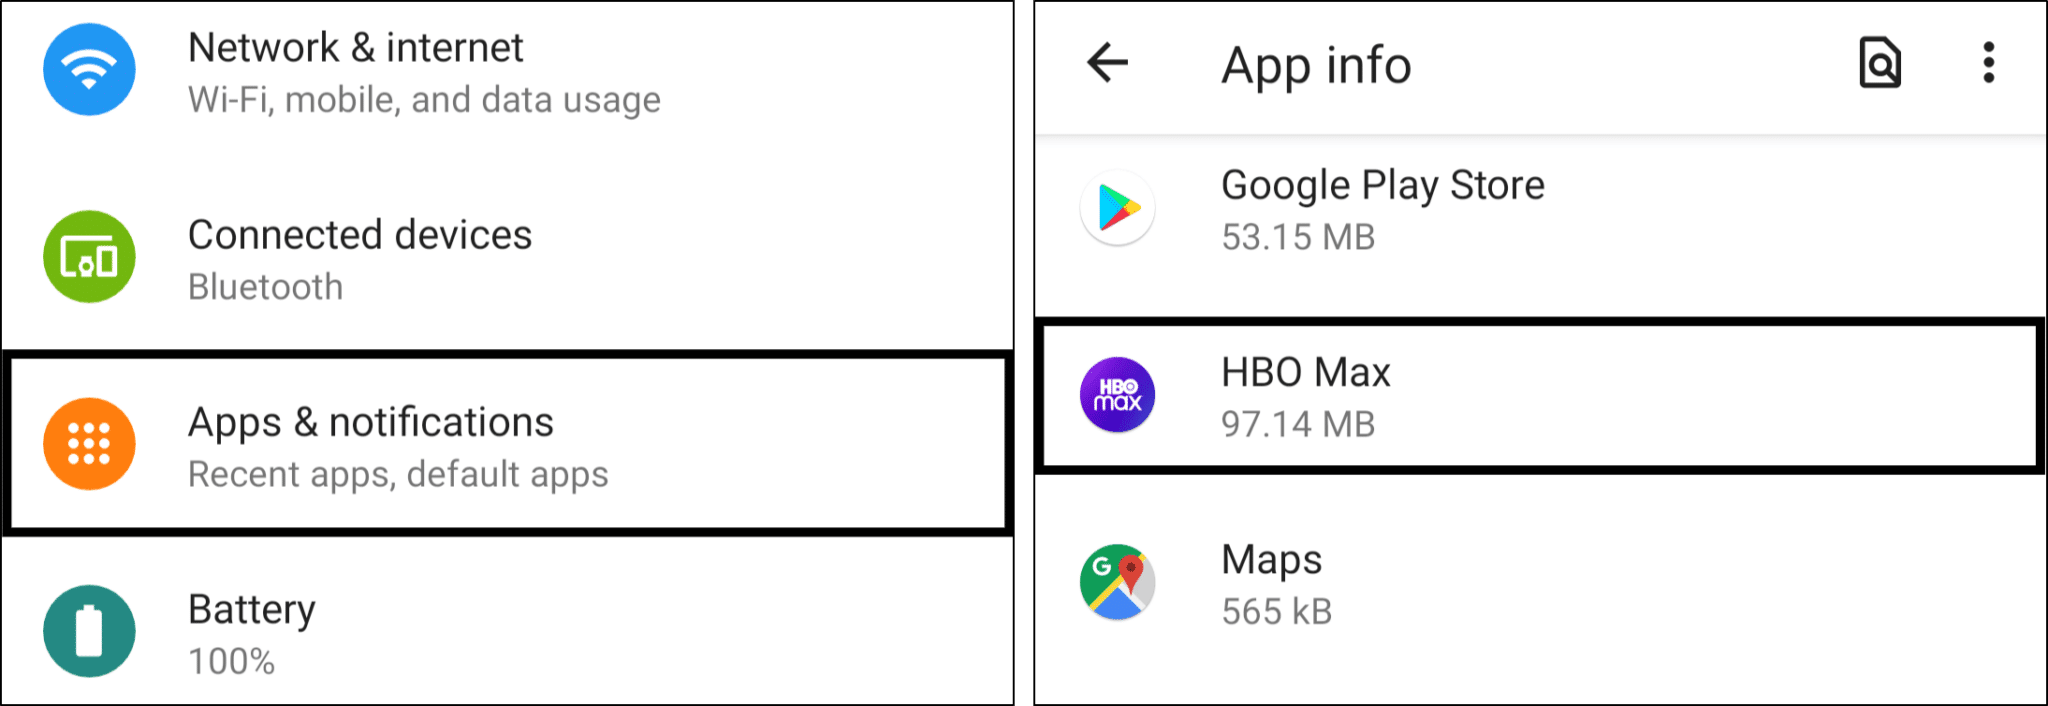 clear hbo max app cache and data on Android streaming devices to fix stream keeps buffering, not loading or playing